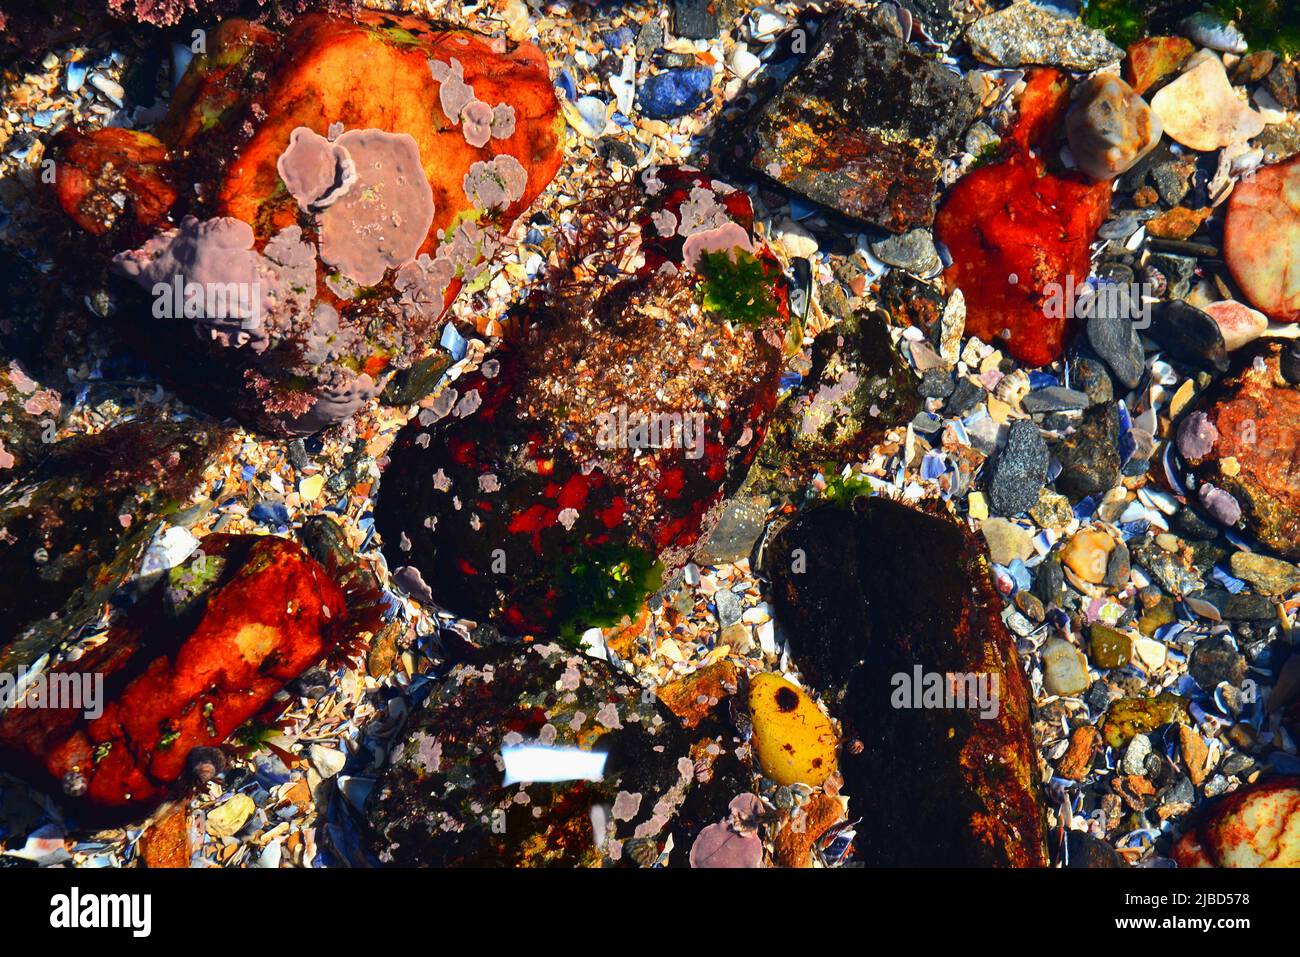 Rich colouring of the sea bed Stock Photo